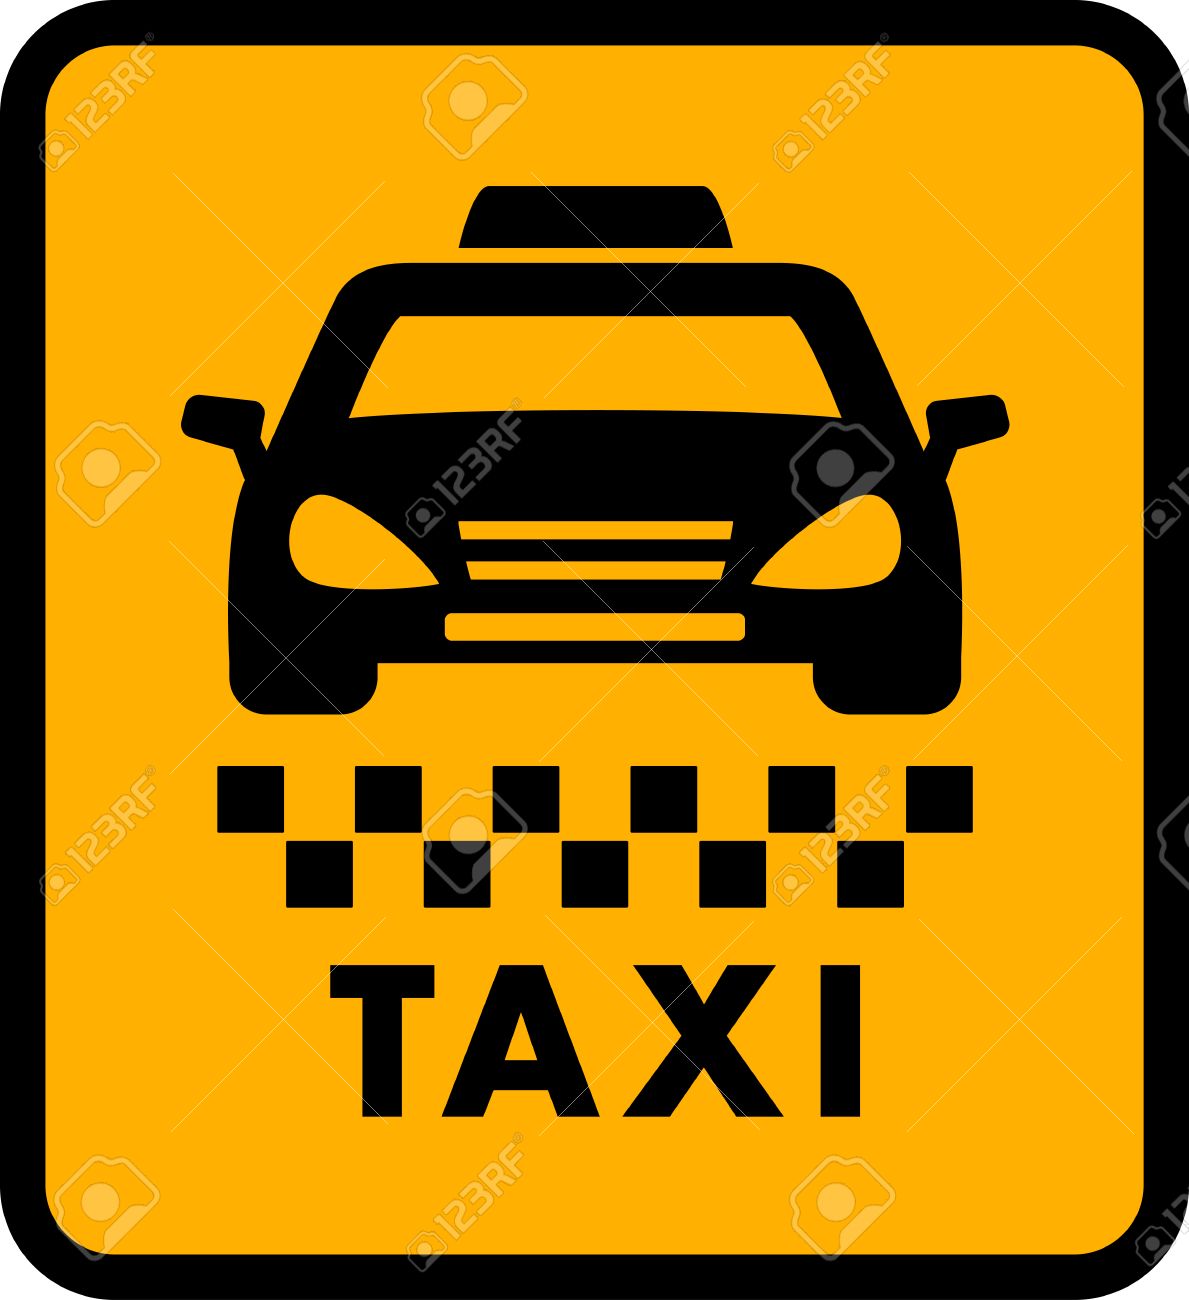 Taxi Cab Images